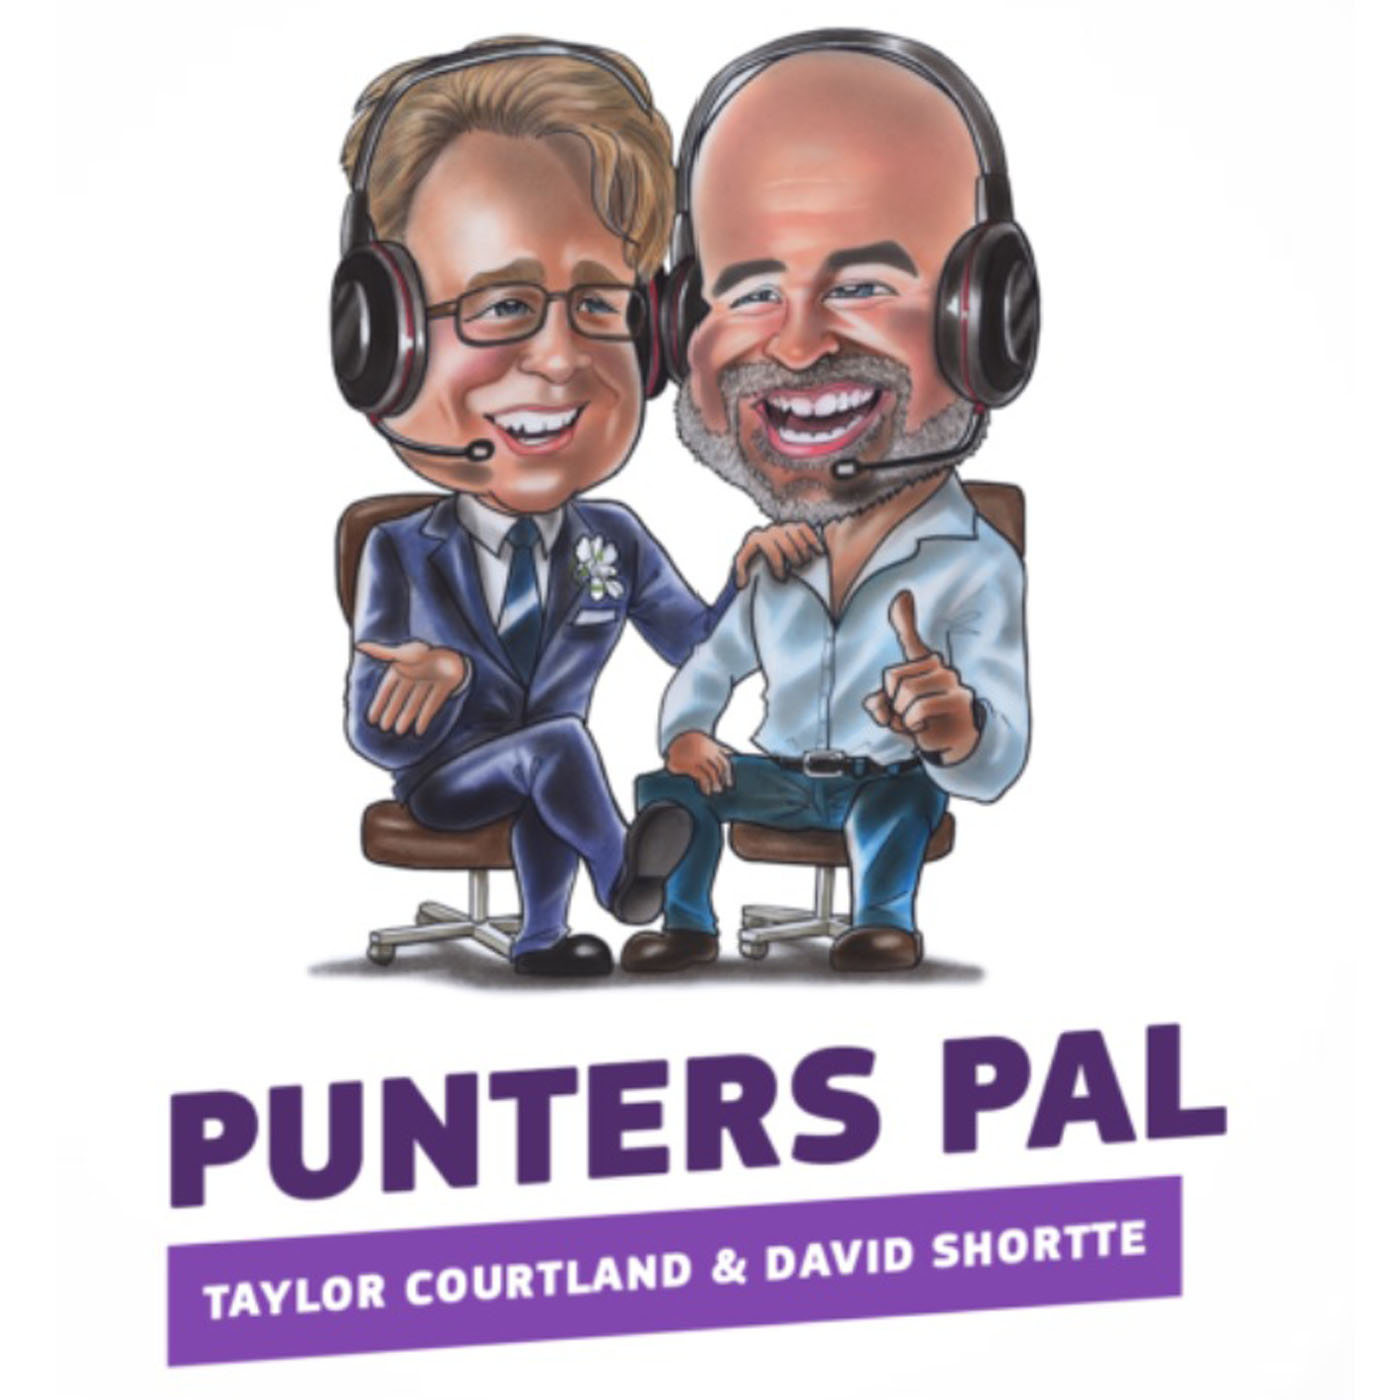 PUNTERS PAL PODCAST - The Valley, Randwick and Belmont best bets.